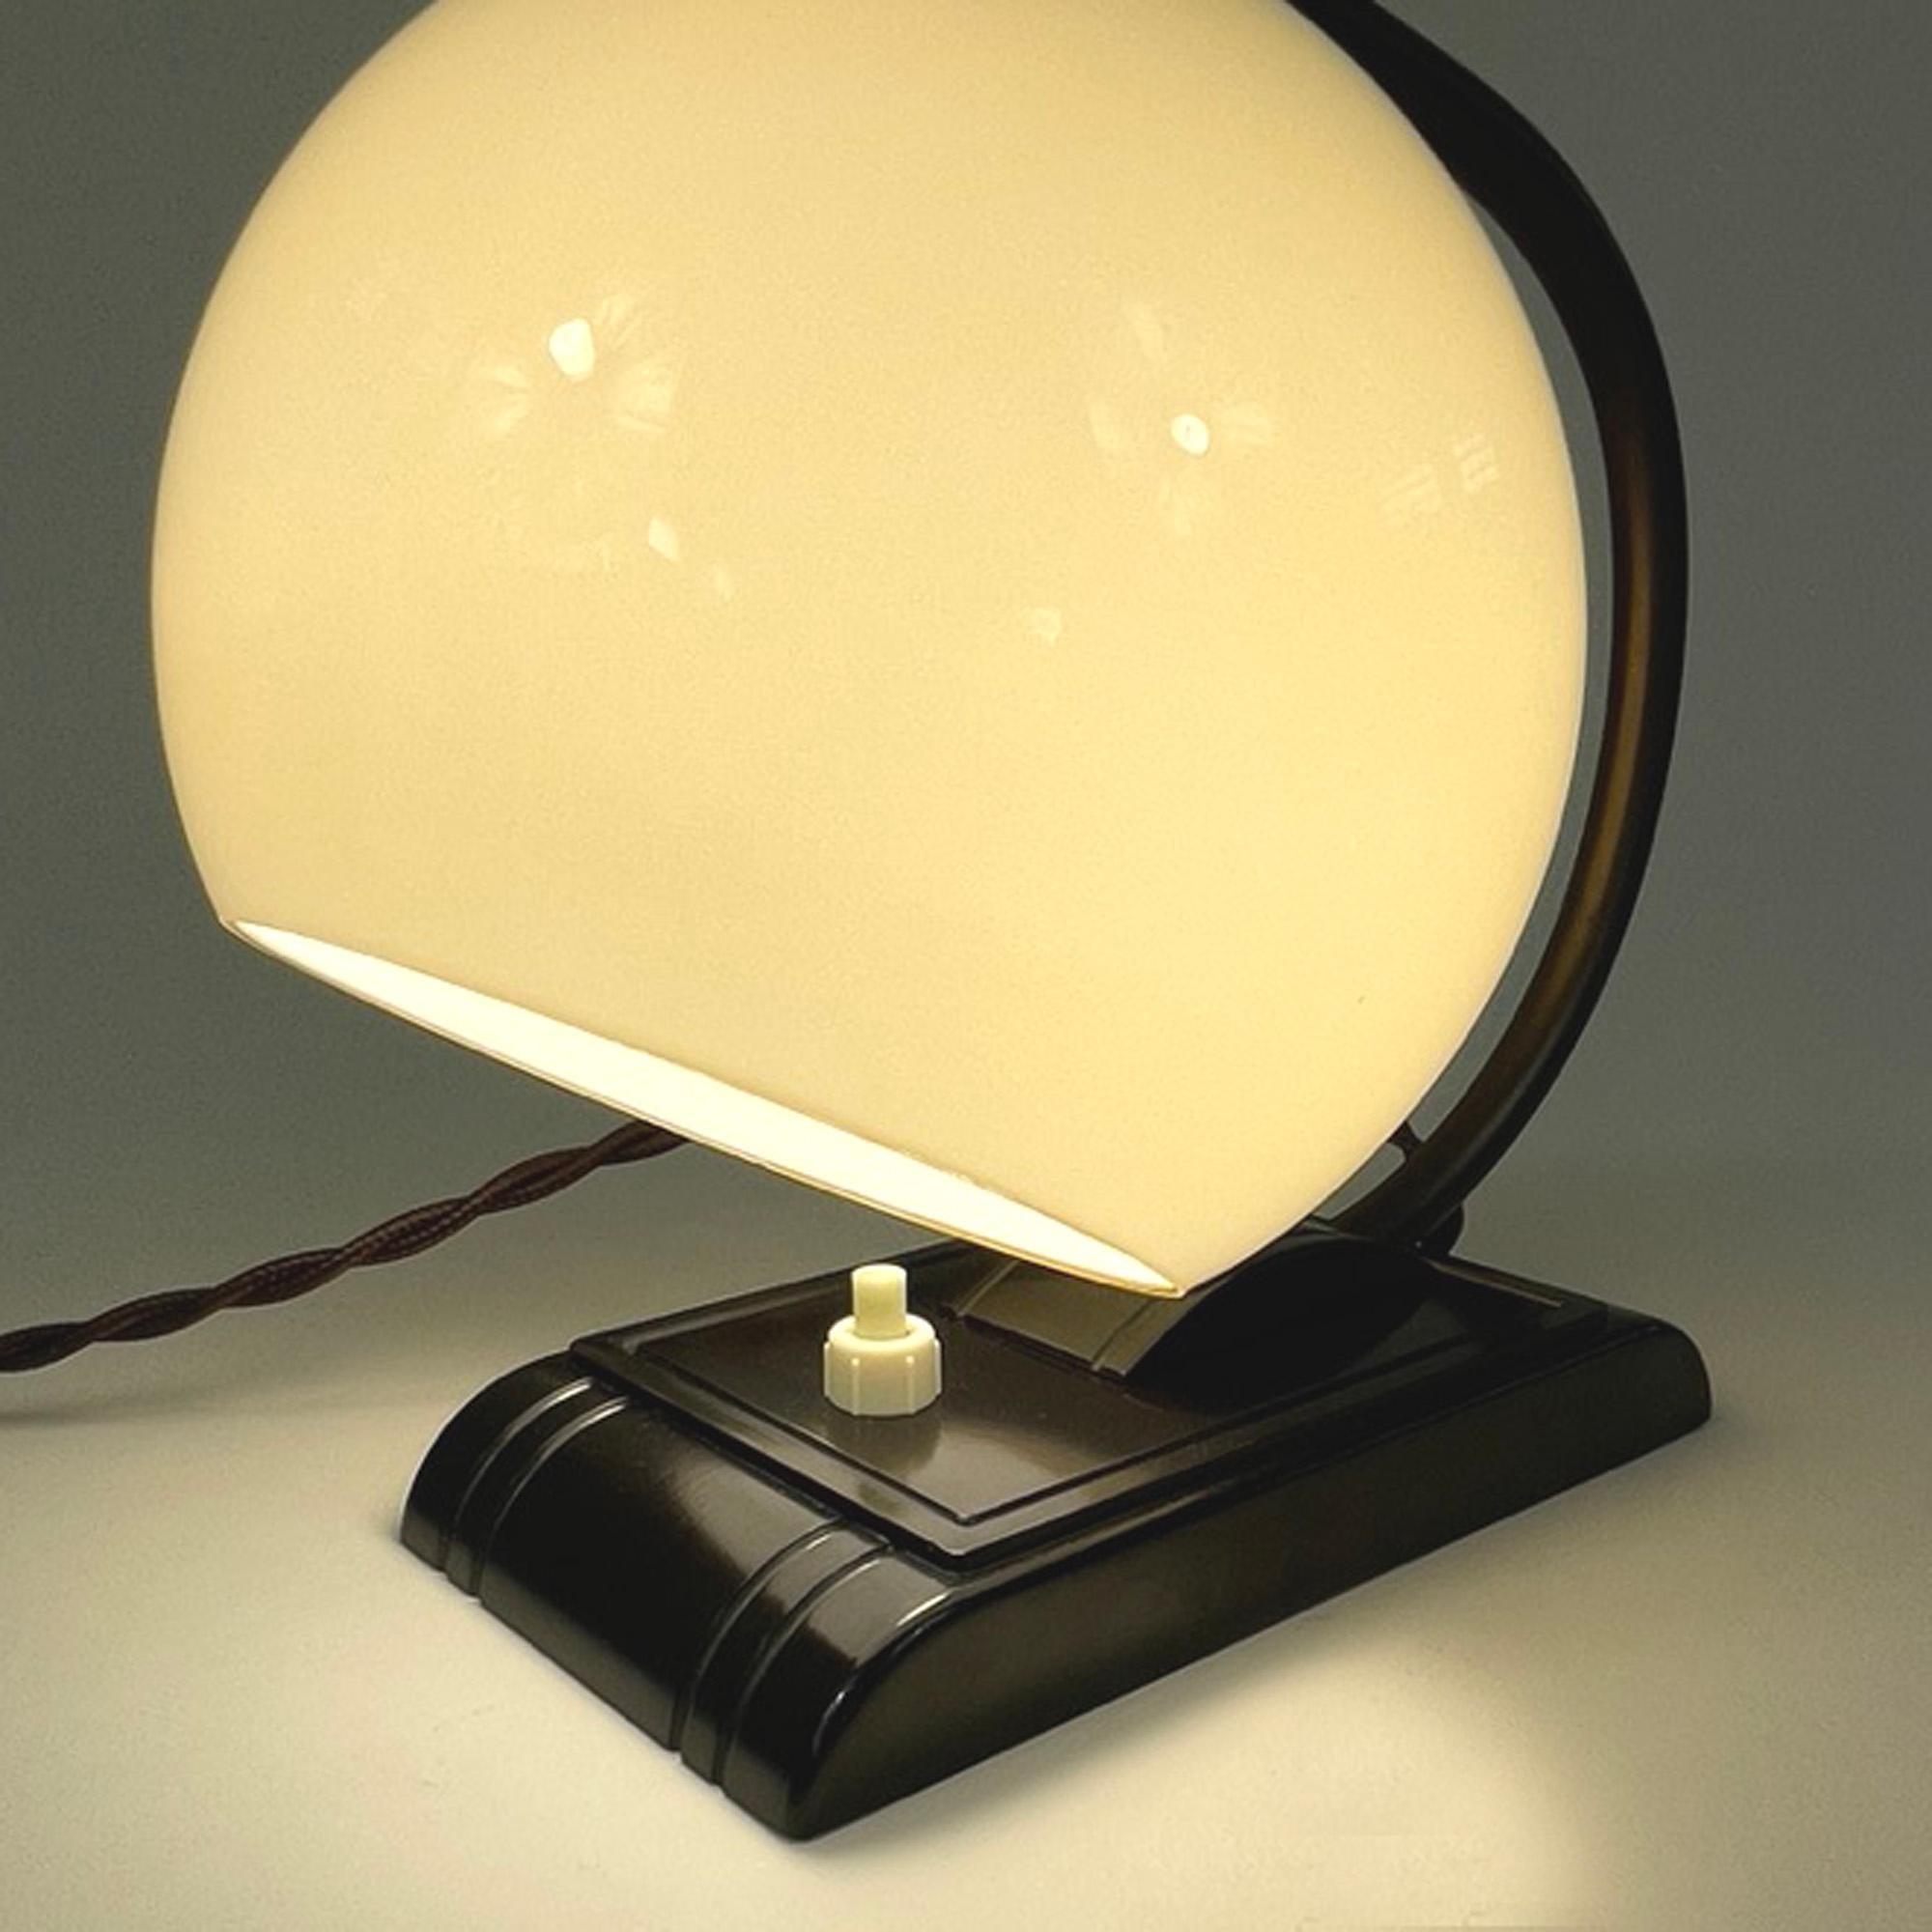 Art Deco Streamline Design Bakelite and Opaline Table Lamp, 1920s to 1930s For Sale 9